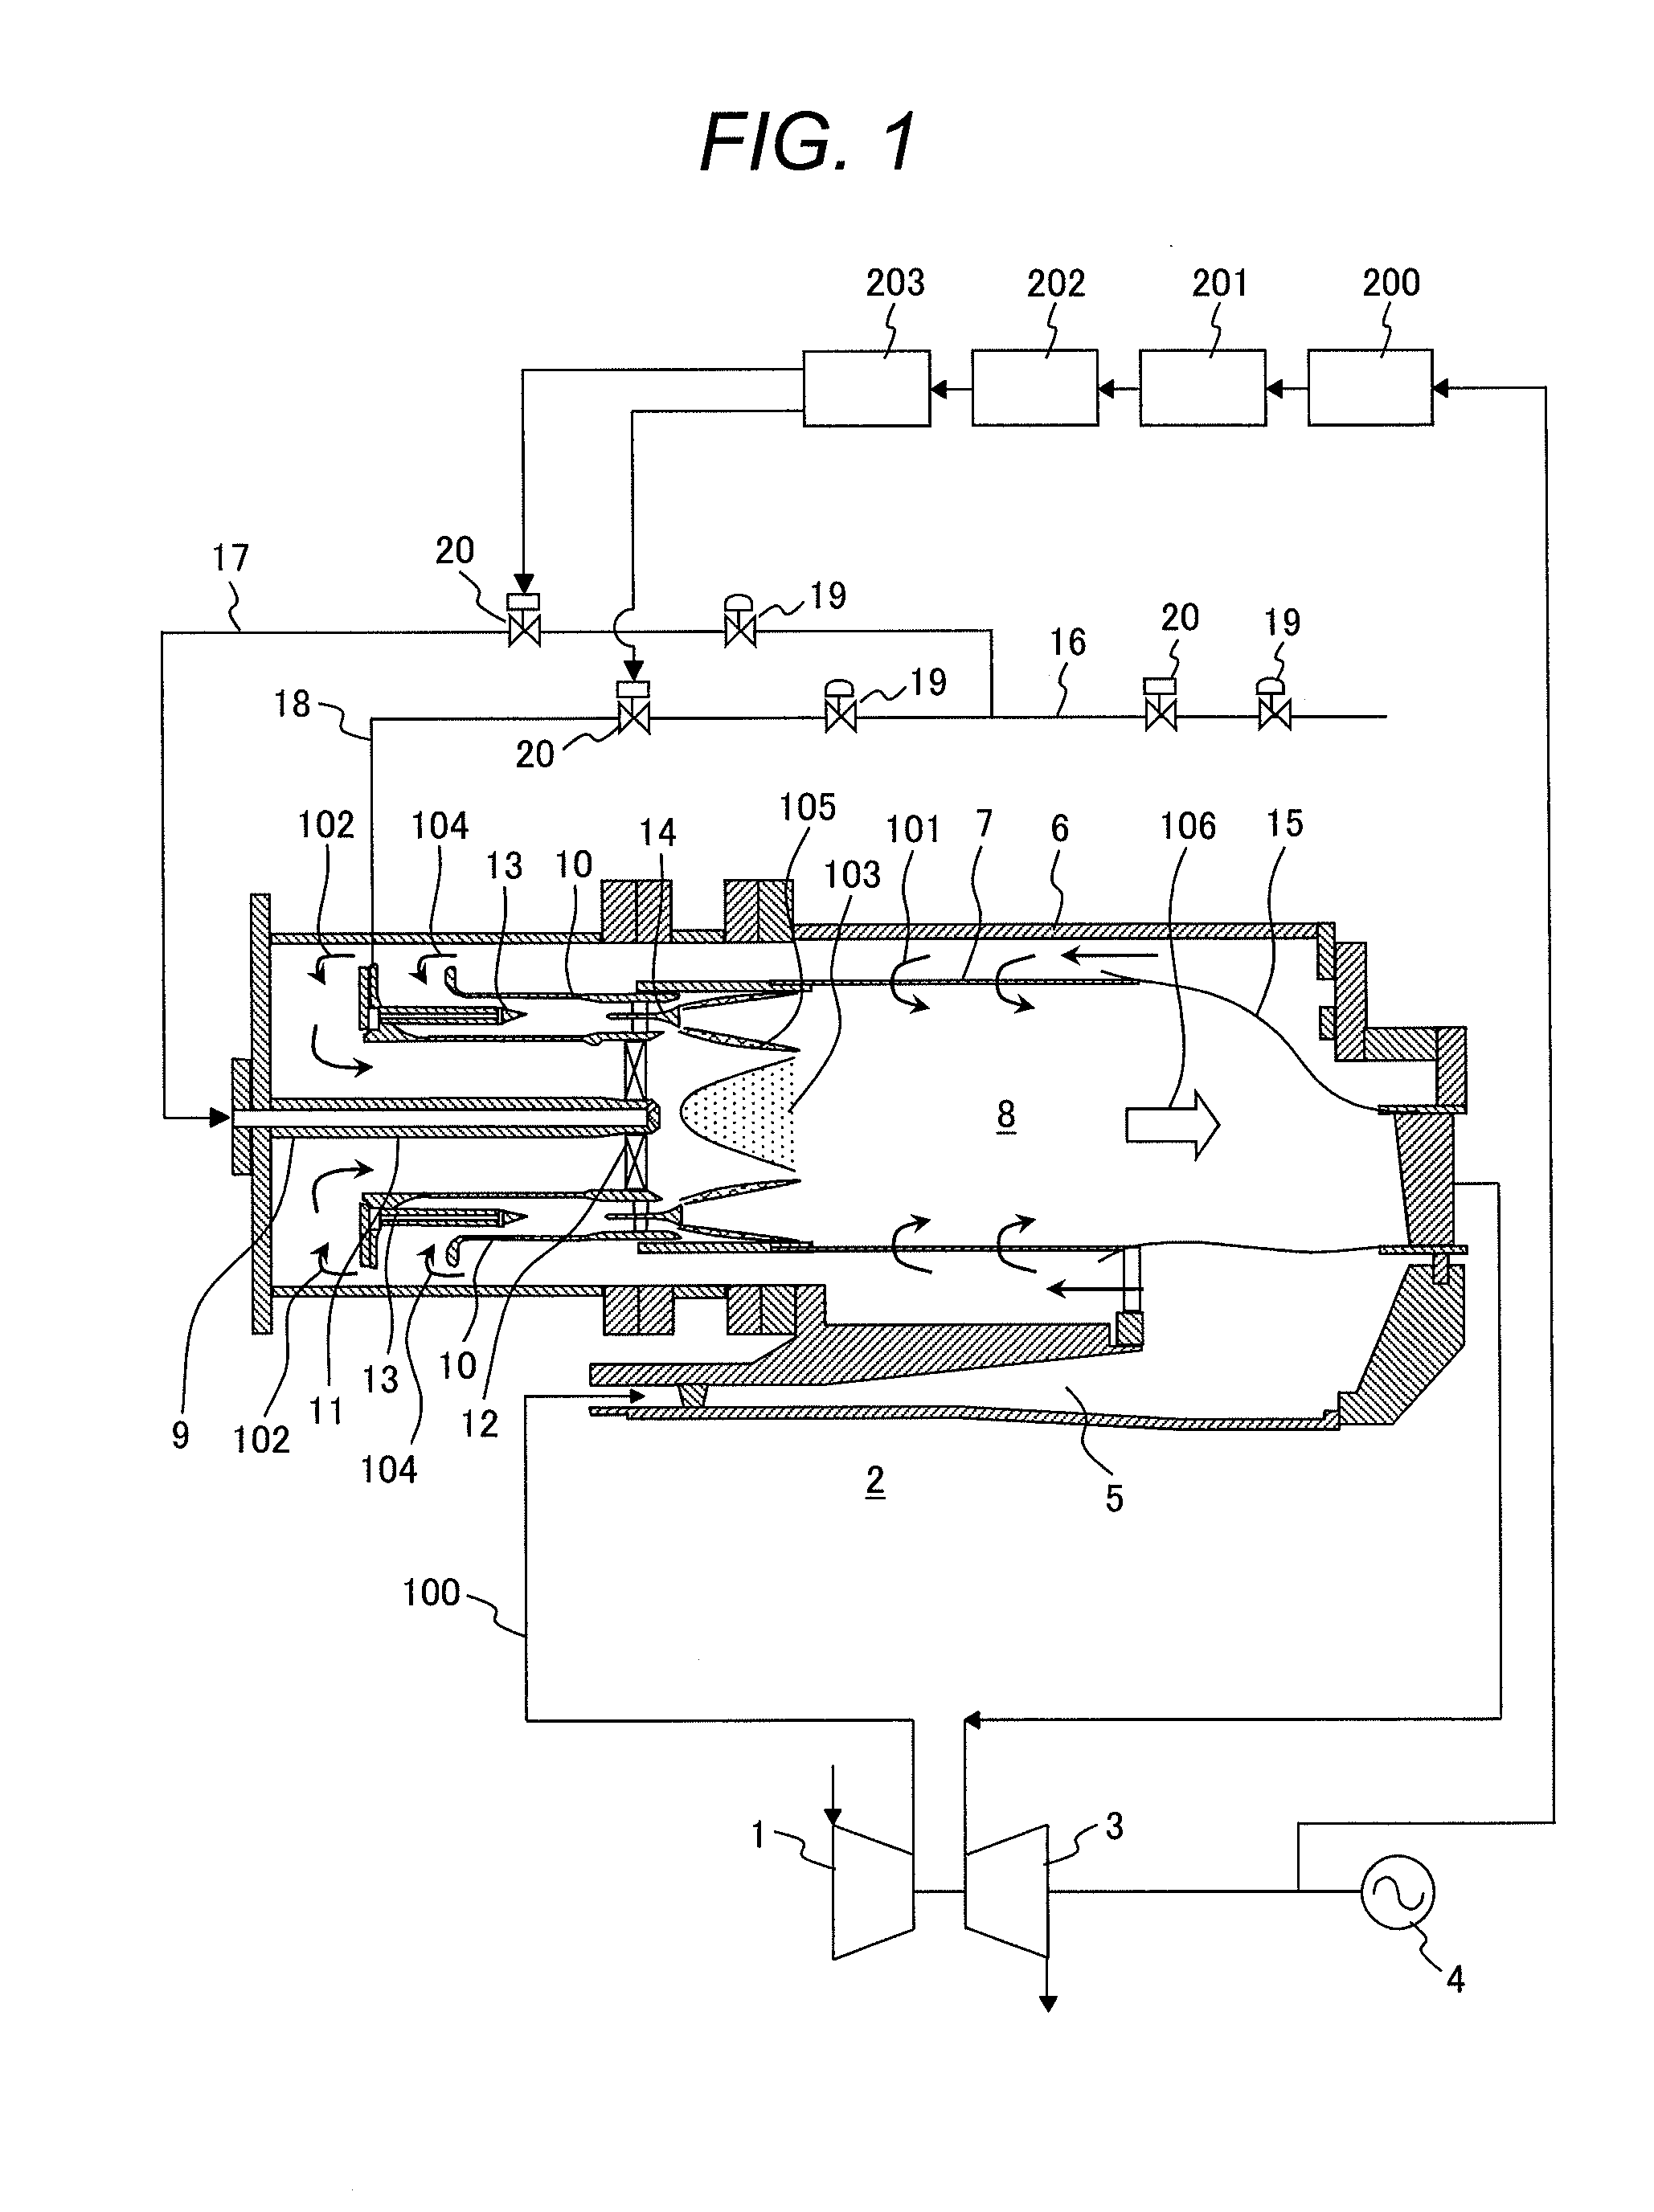 Method and Apparatus for Controlling Gas Turbine Combustor